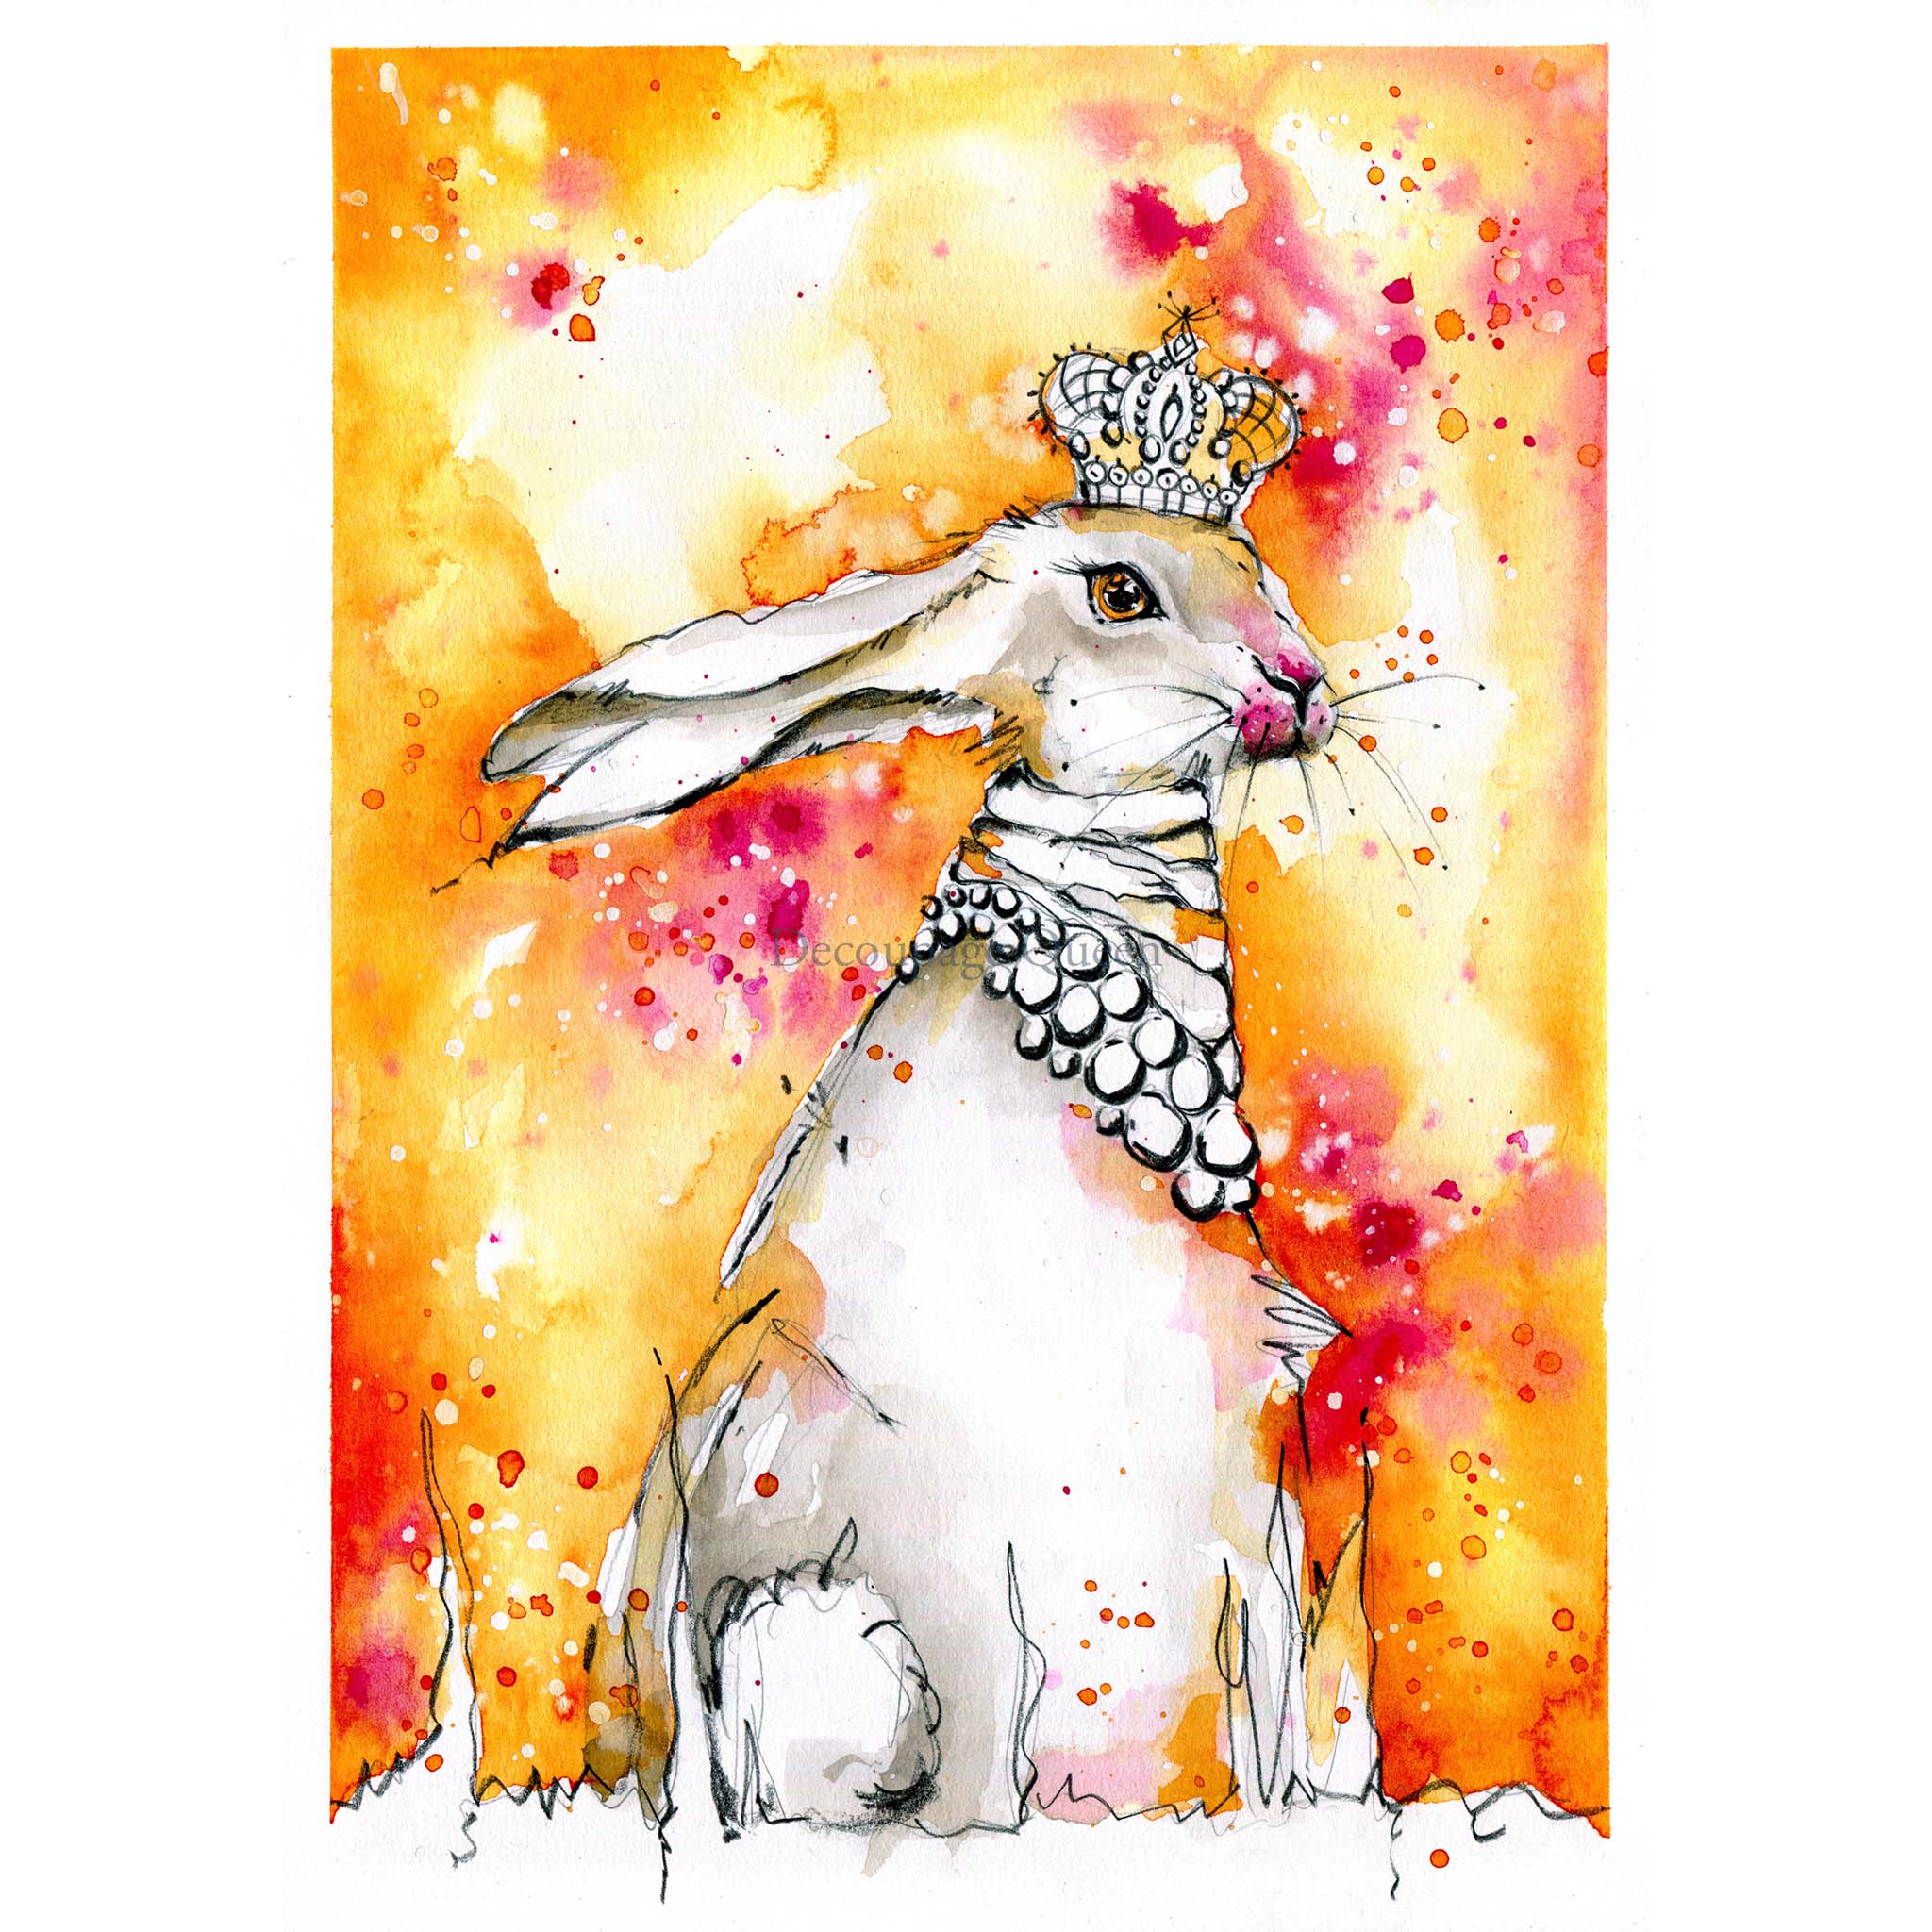 A4 rice paper design that features a vibrant orange watercolor background, accented with pops of red and a regal white rabbit wearing a crown and collar necklace is against a white background.